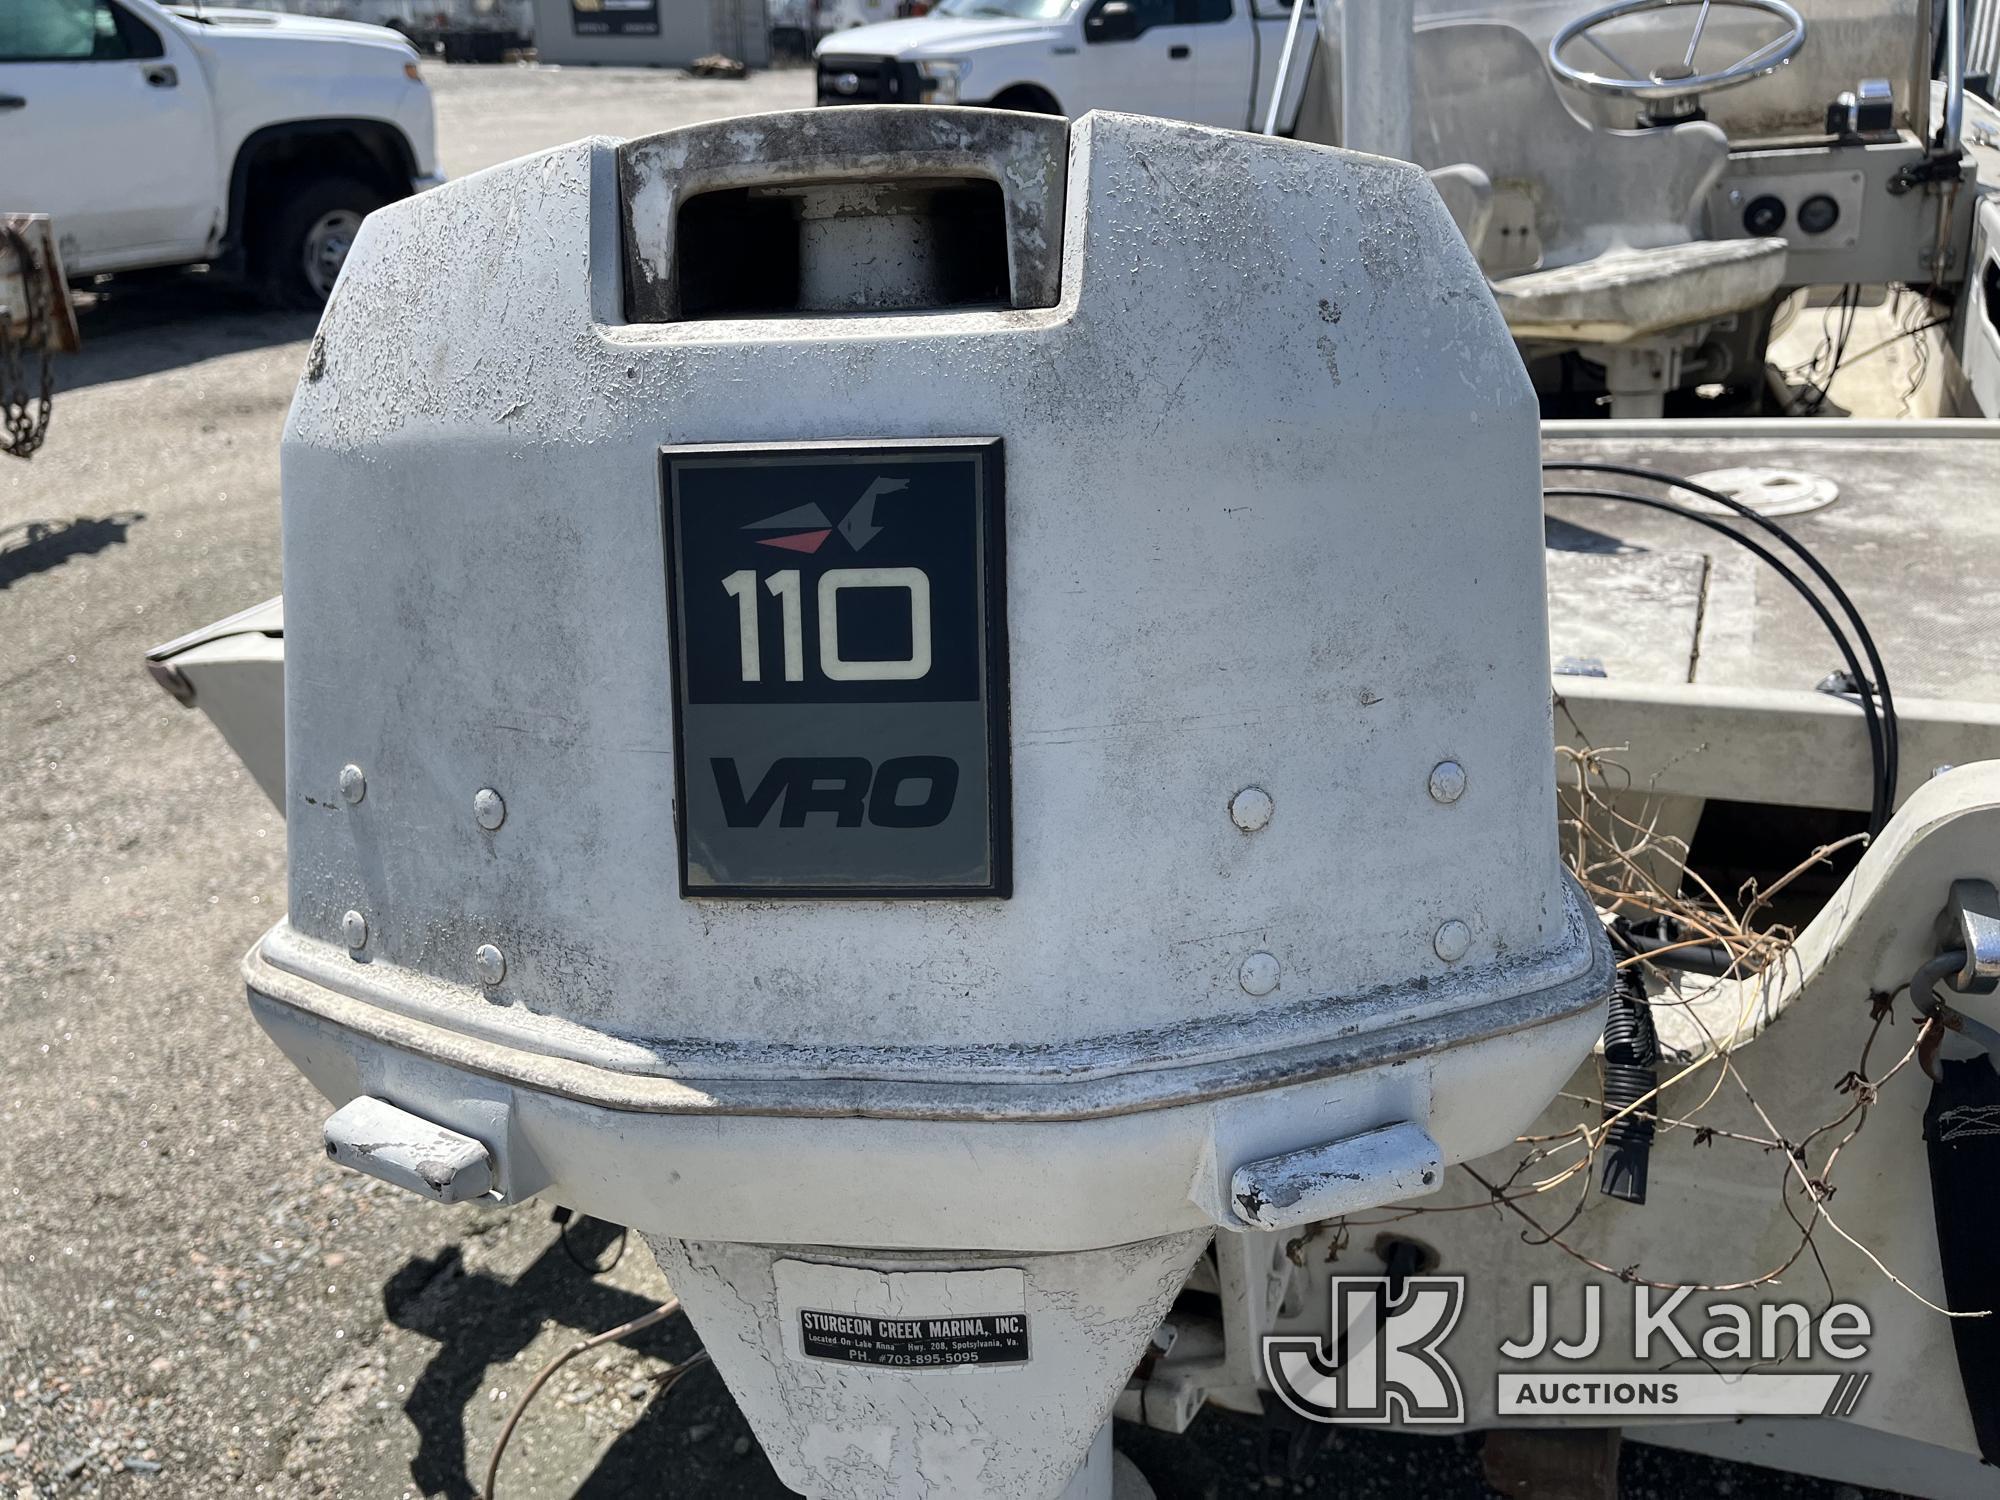 (Chester, VA) 1979 Boston Whaler 17ft Boat No Title) (PARTS ONLY